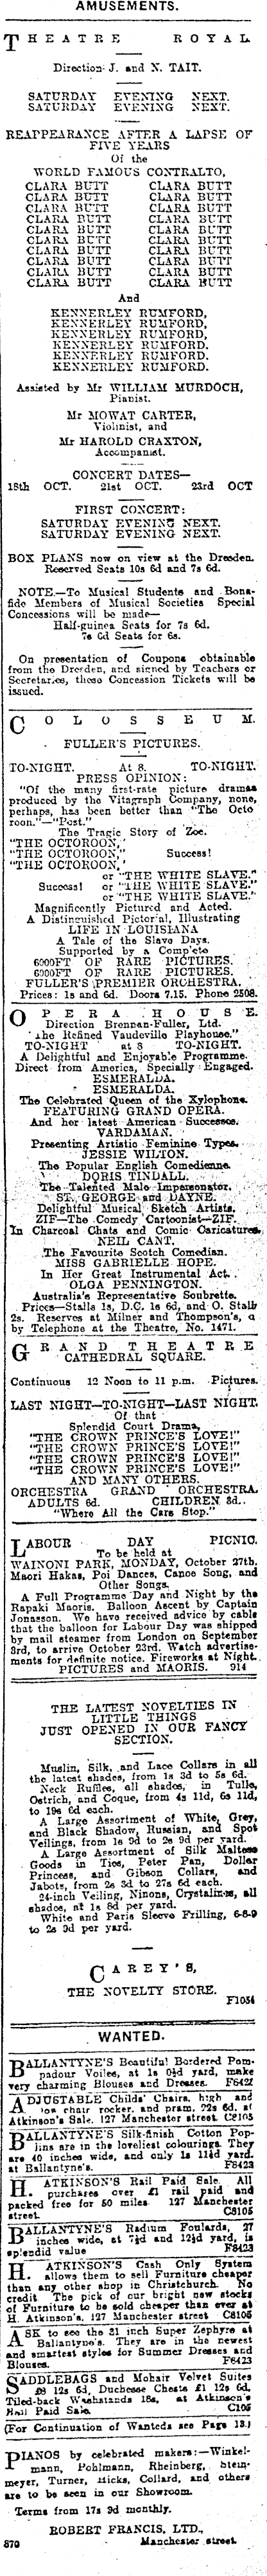 Papers Past Newspapers Press 15 October 1913 Page 1 Advertisements Column 7